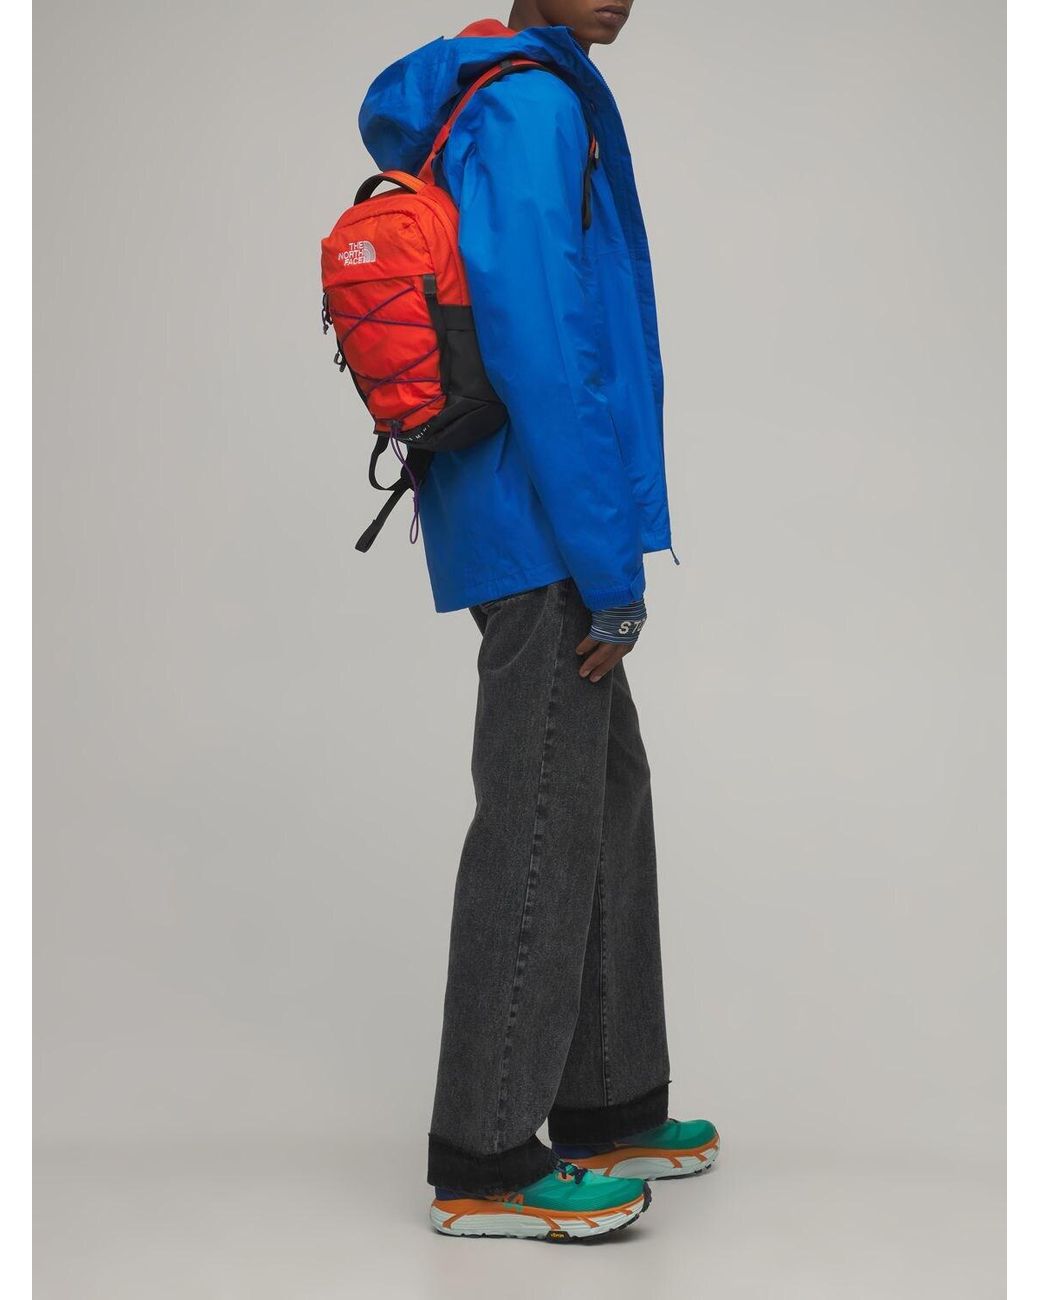 The North Face Mini Borealis Backpack in Red Orange (Red) for Men | Lyst